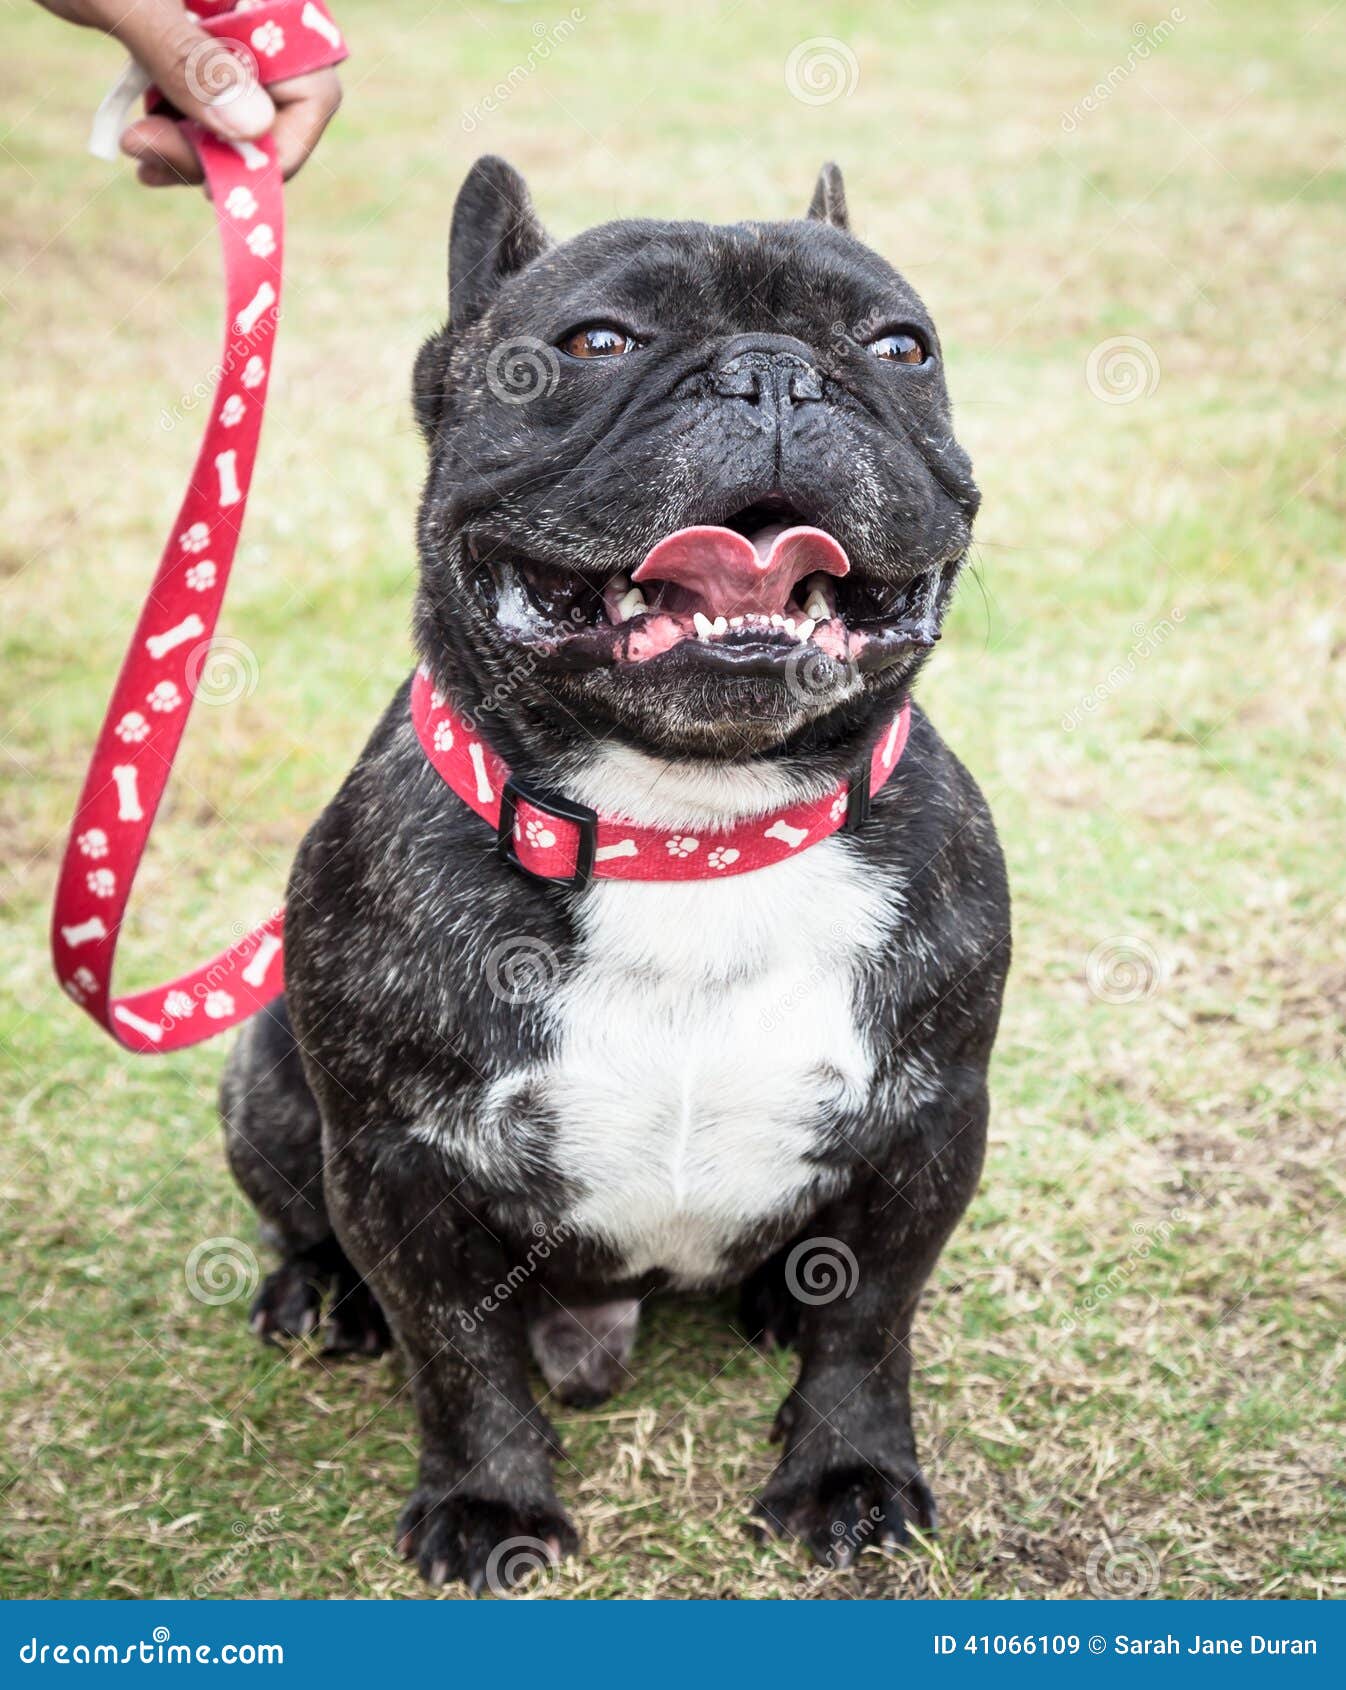 Dark Brindle French Bulldog with Red Generic Leash Stock Image - Image ...